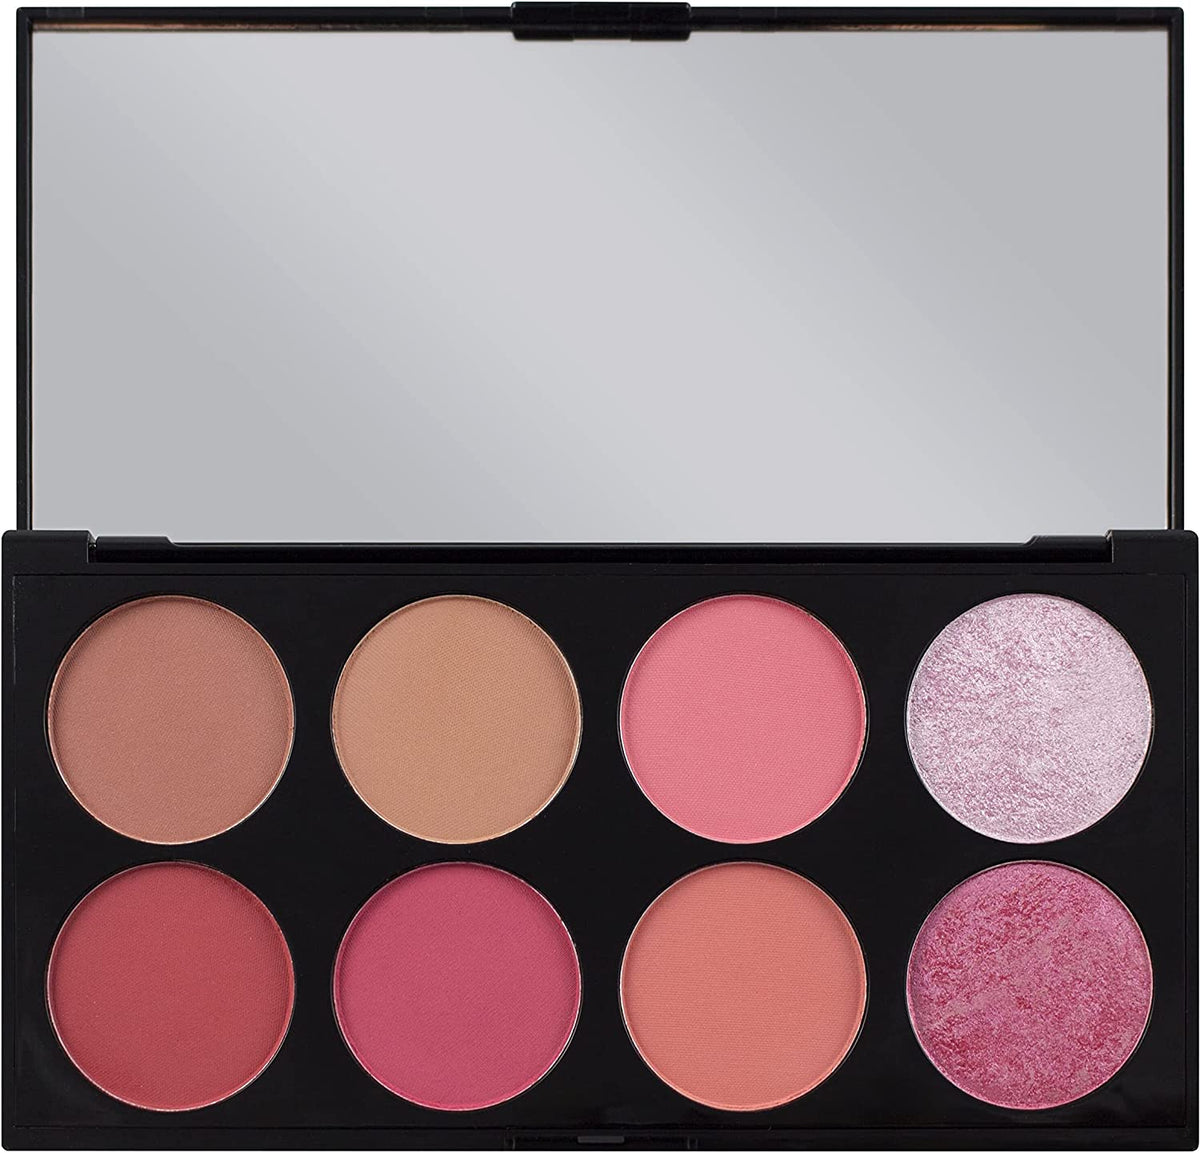 Ultra Blush Palette in Sugar and Spice - 8 Colors